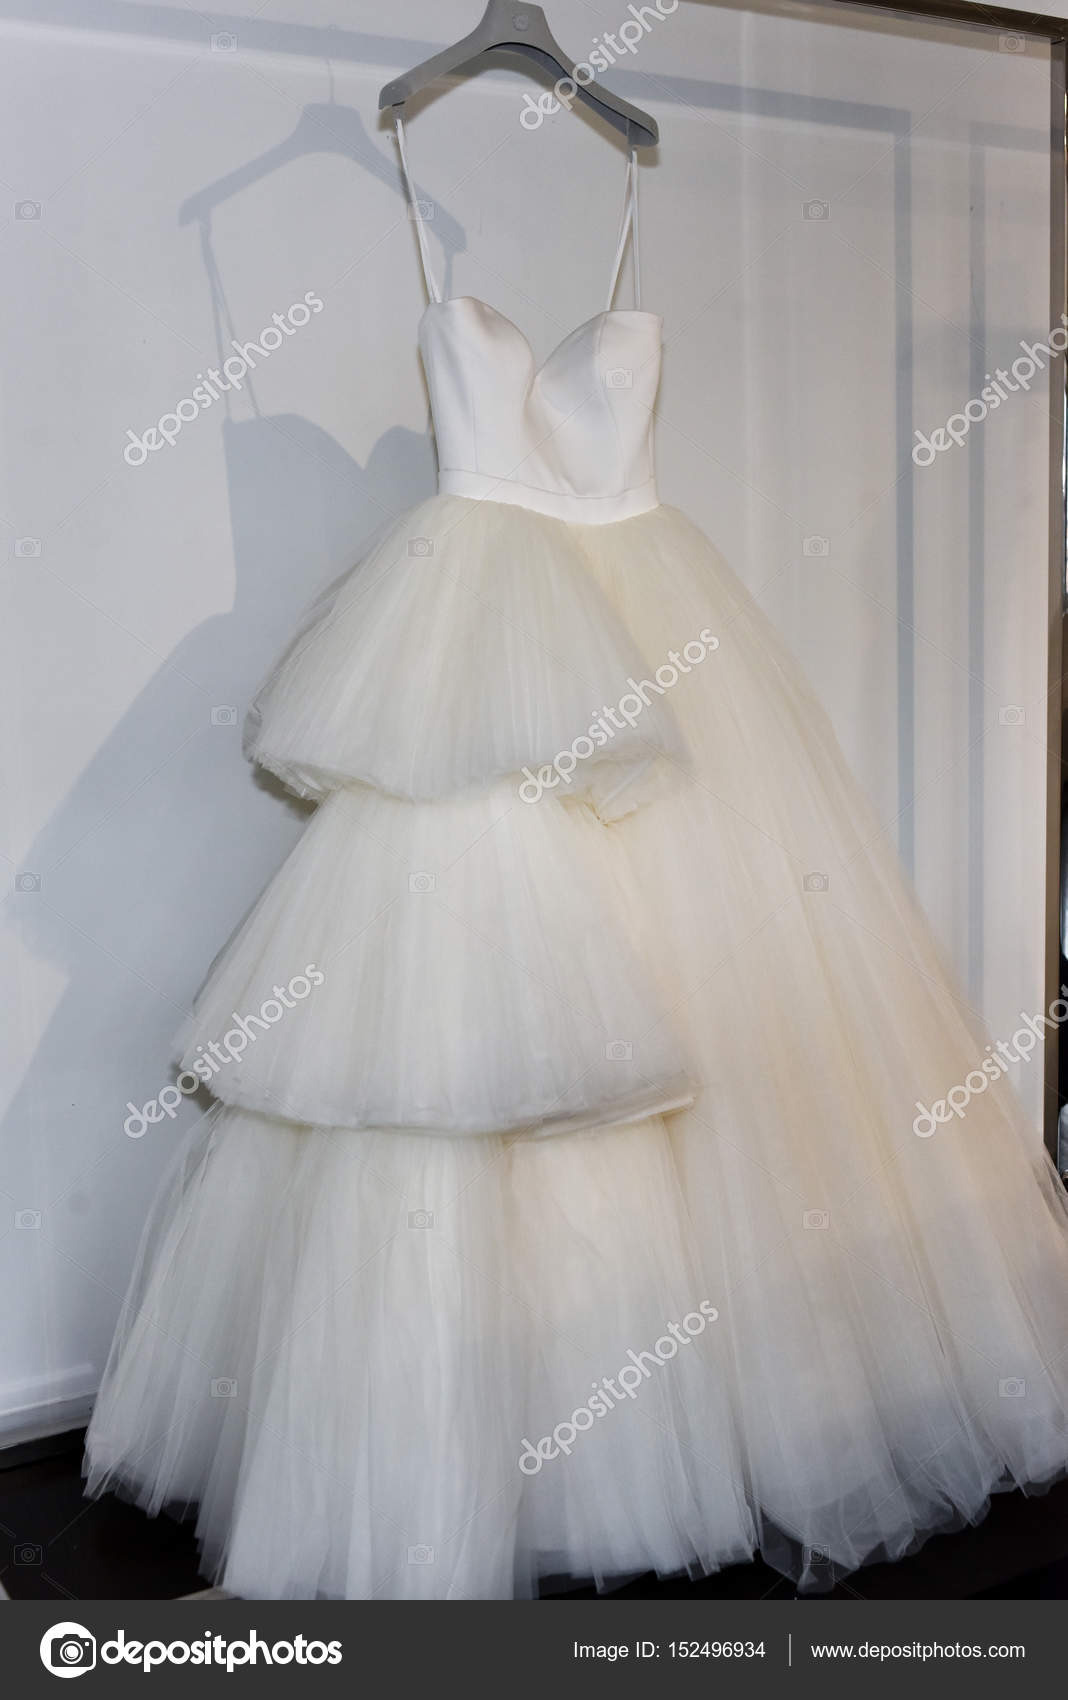 Bridal Dress During The Viktor And Rolf Mariage Collection Presentation Stock Editorial Photo C Fashionstock